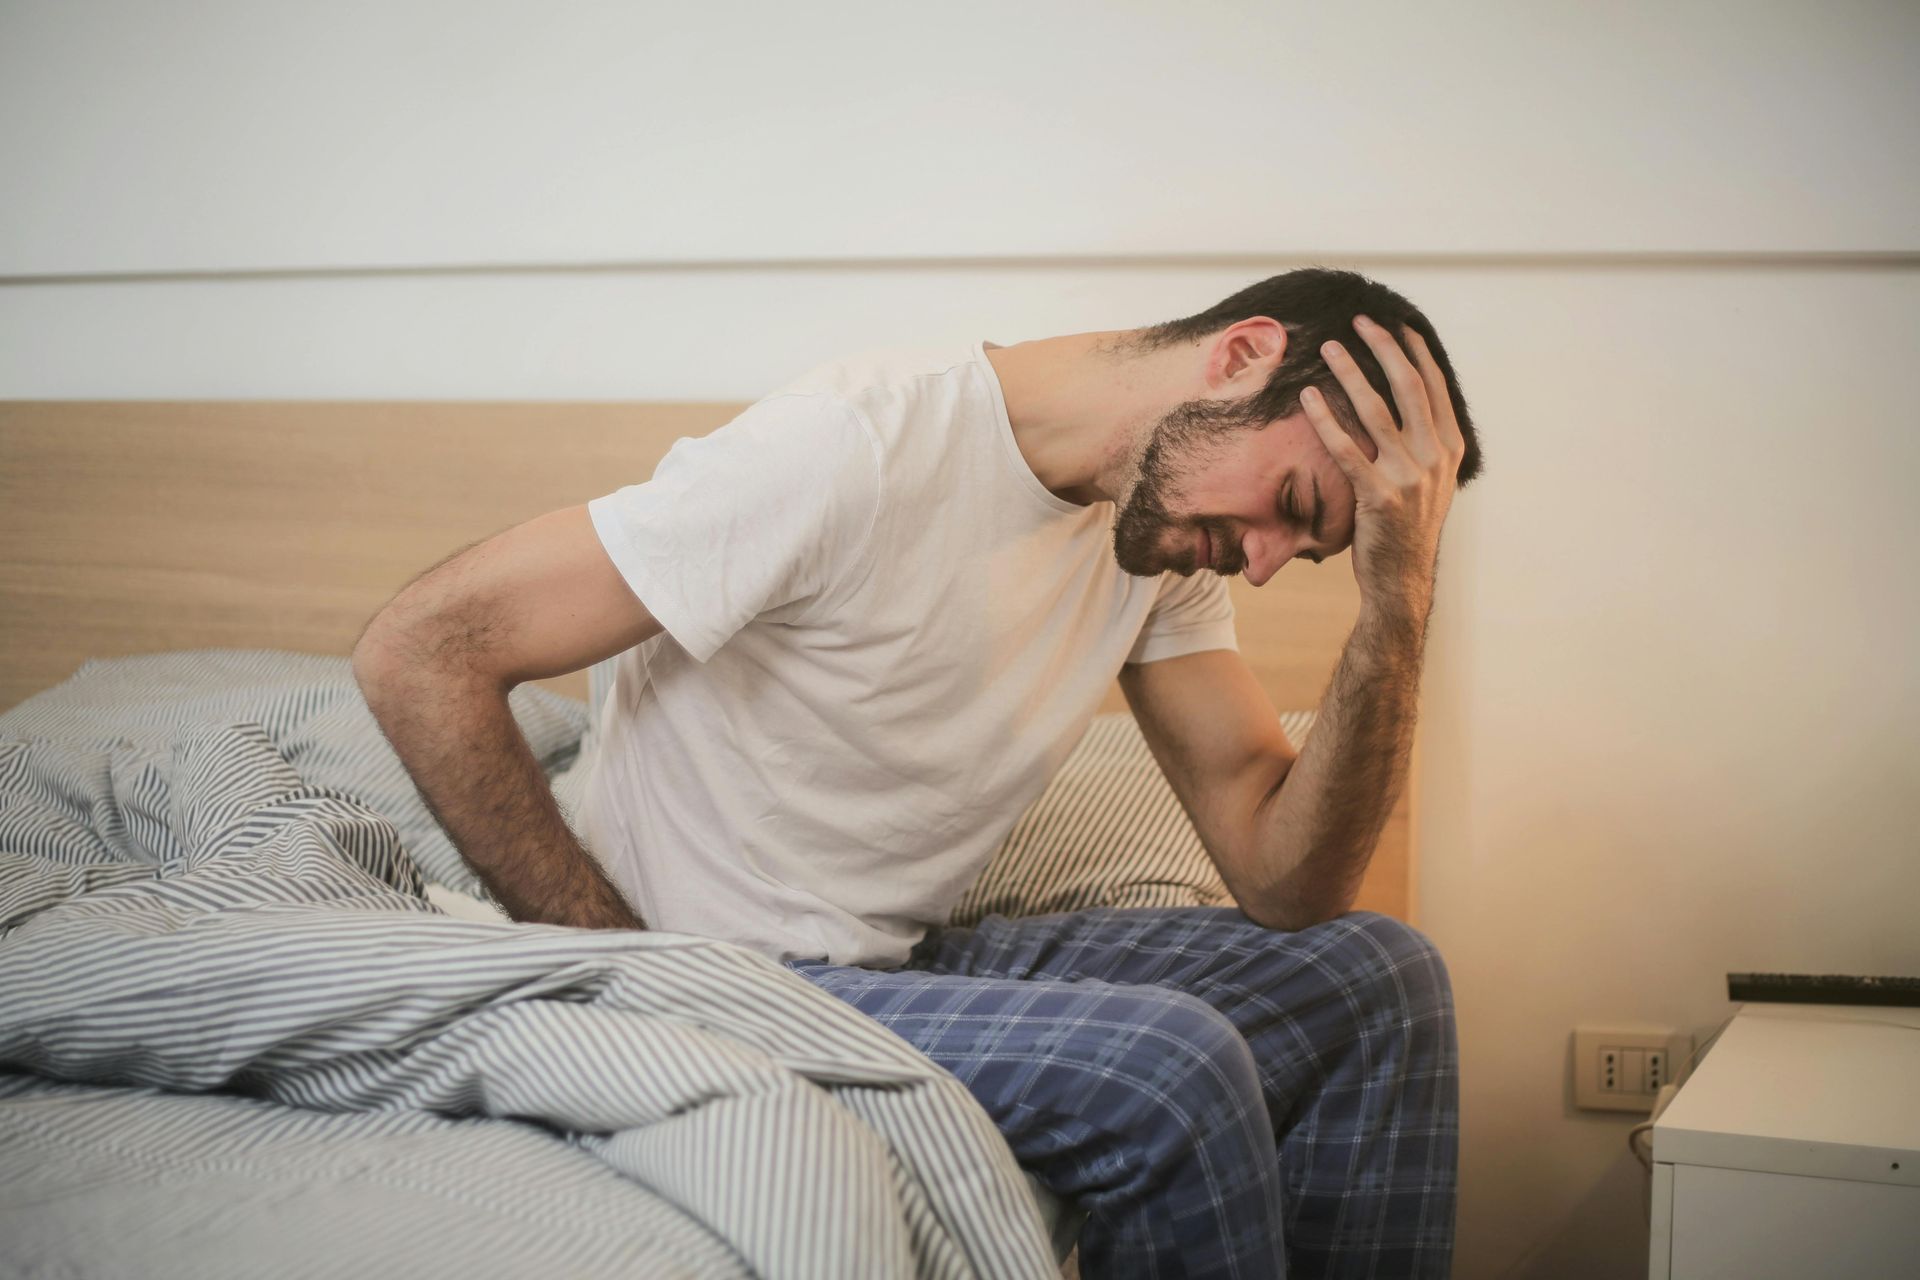 A man with back pain getting out of bed